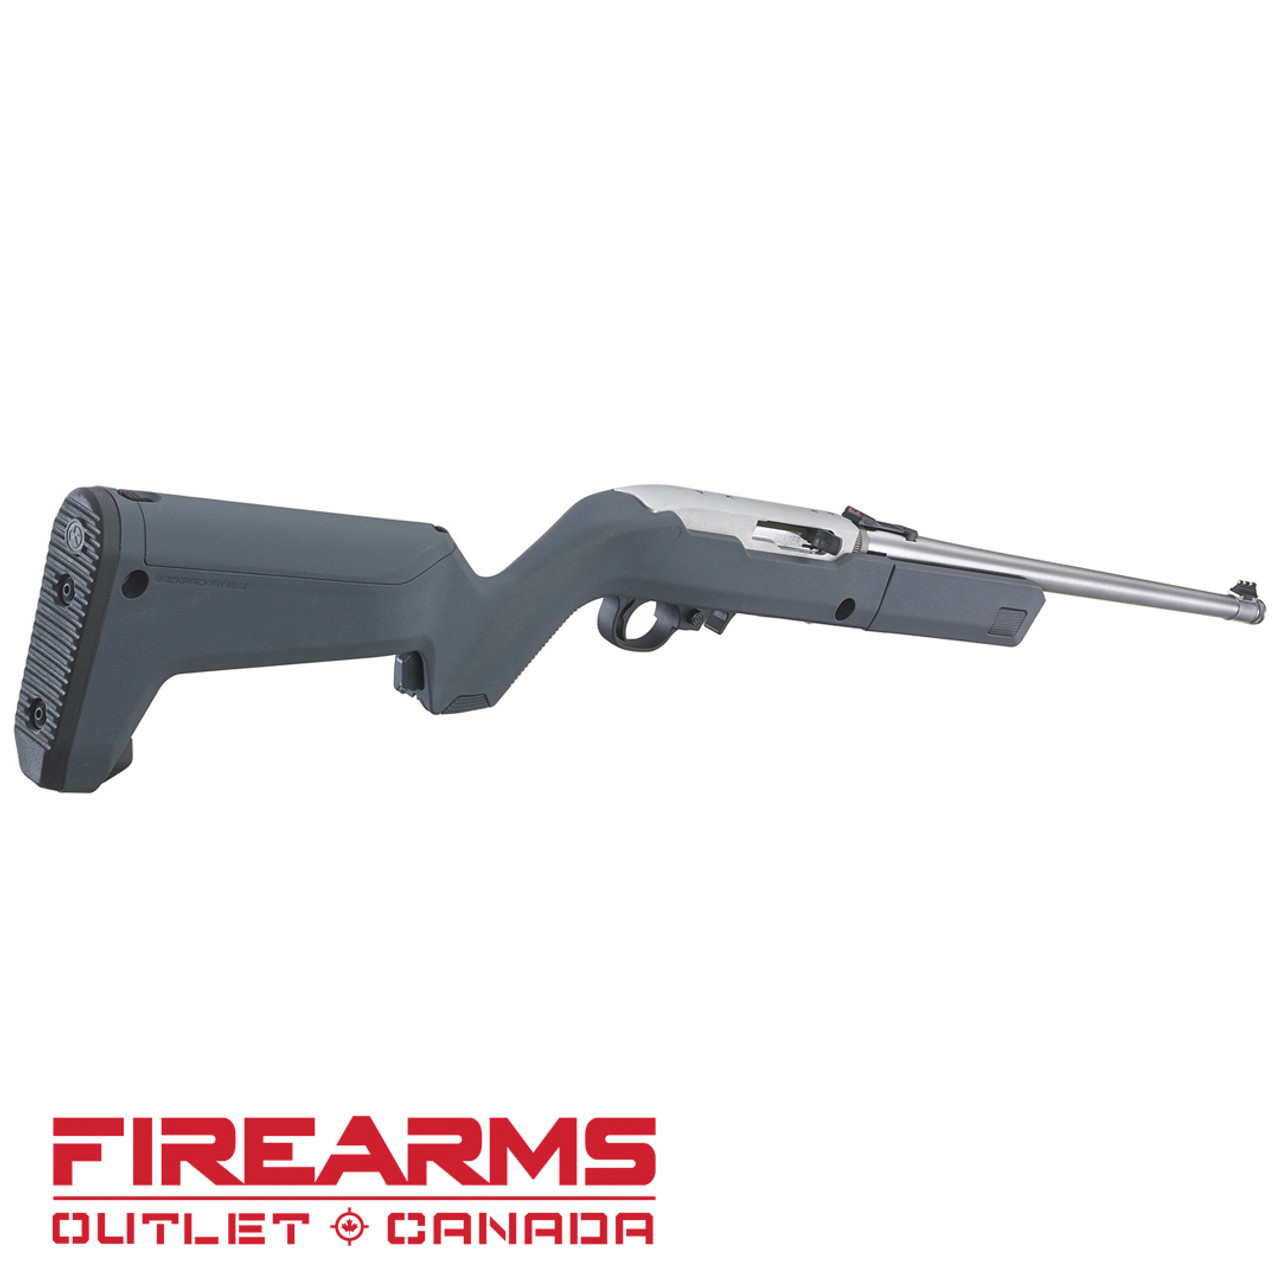 Ruger 10/22 Takedown Stainless Steel (Magpul Exclusive) - .22LR, 16.4", GRY [31152]